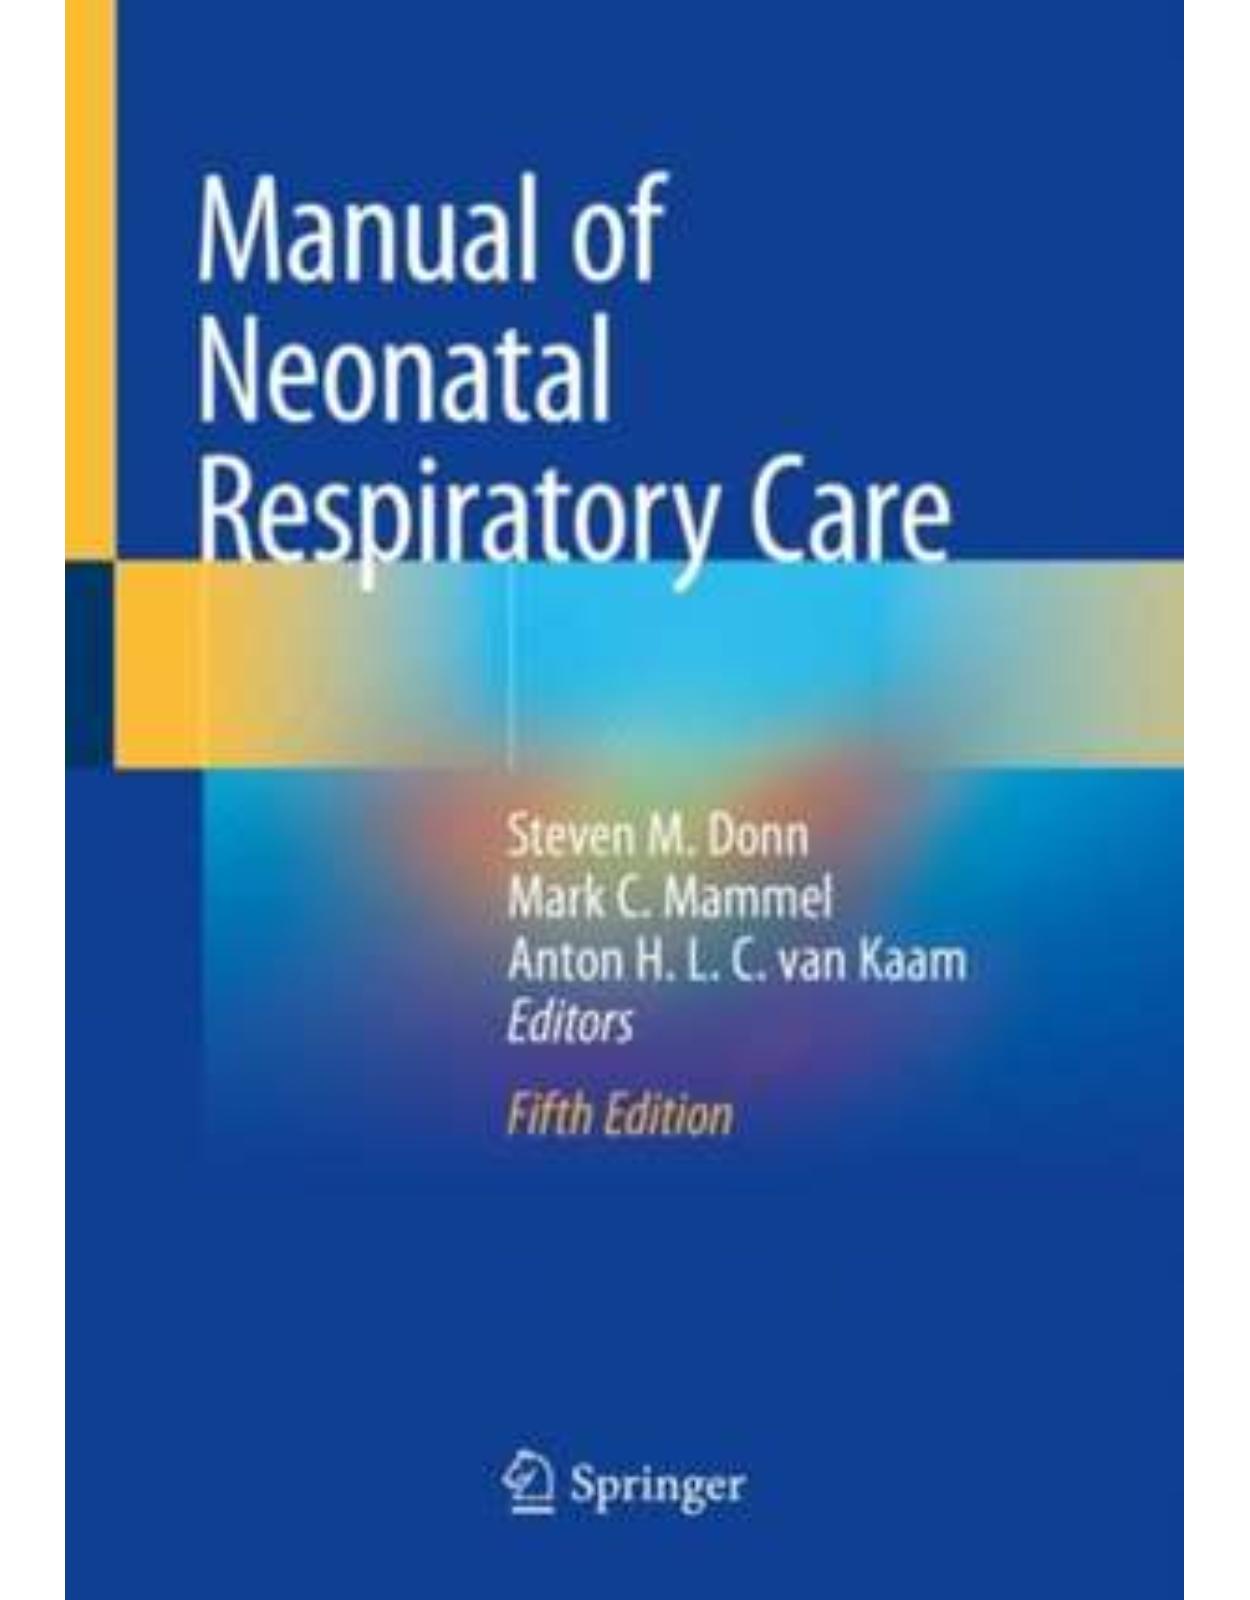 Manual of Neonatal Respiratory Care, Fifth Edition